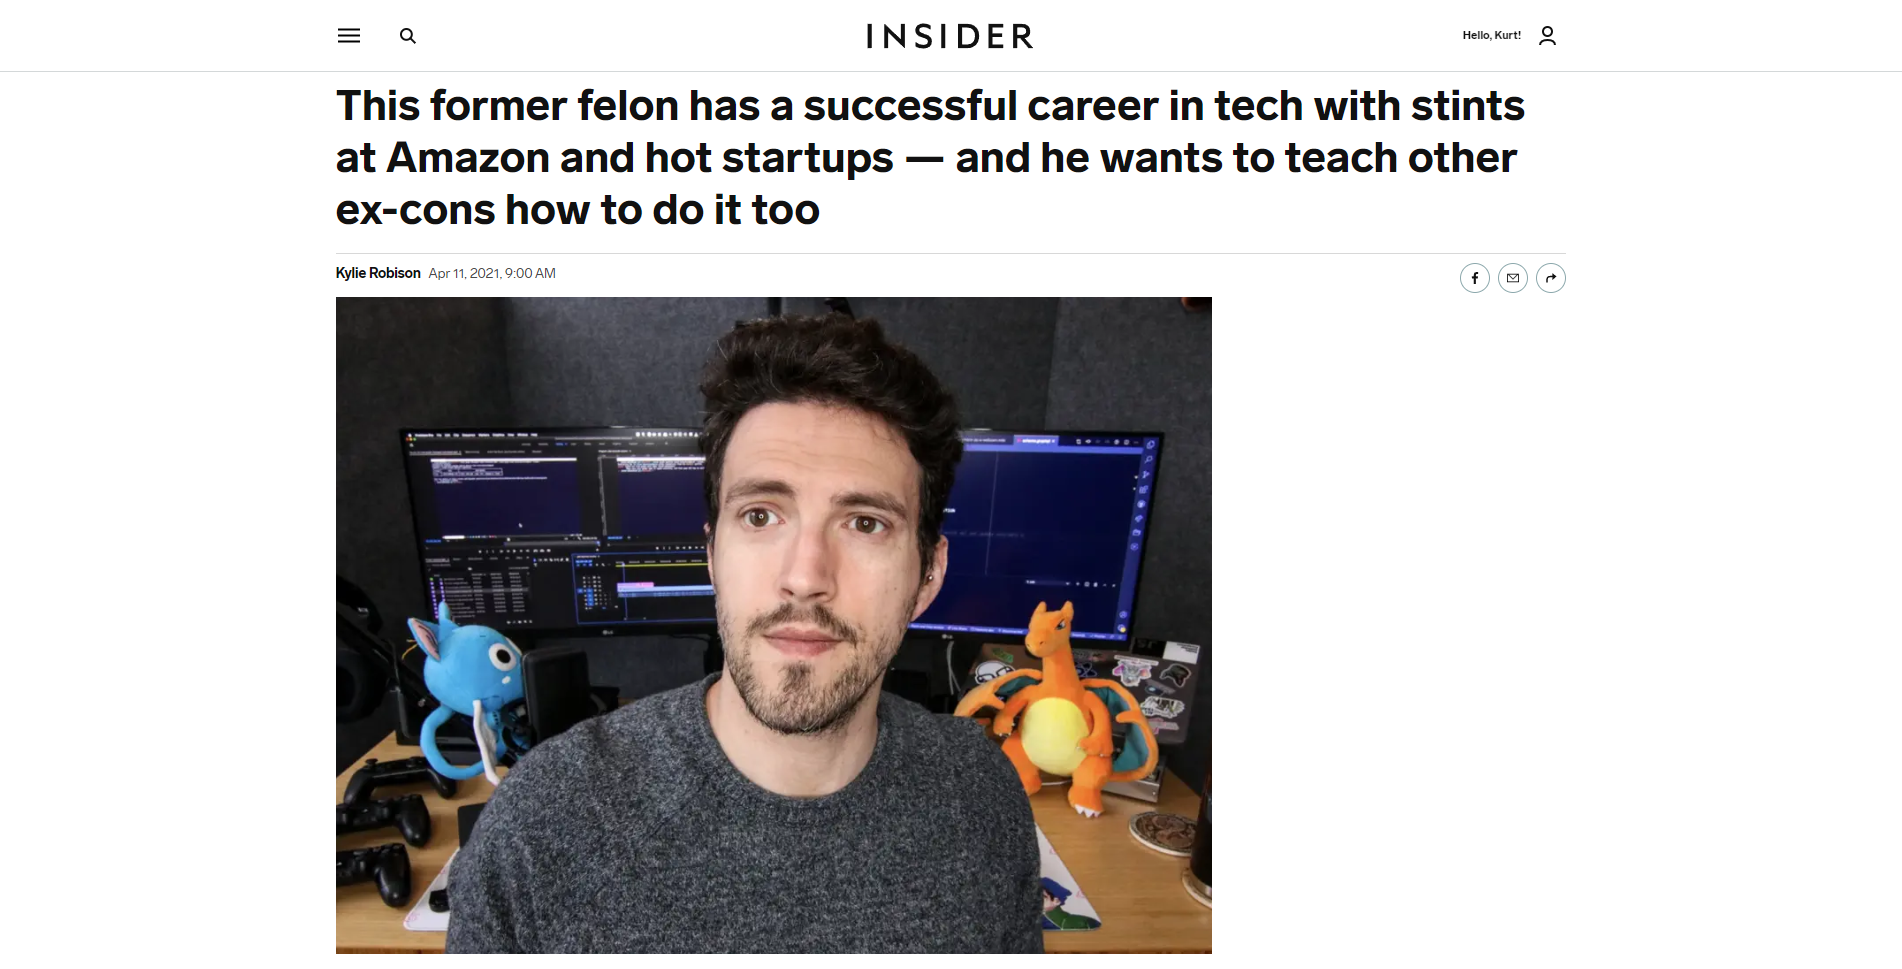 This former felon has a successful career in tech with stints at Amazon and hot startups — and he wants to teach other ex-cons how to do it too